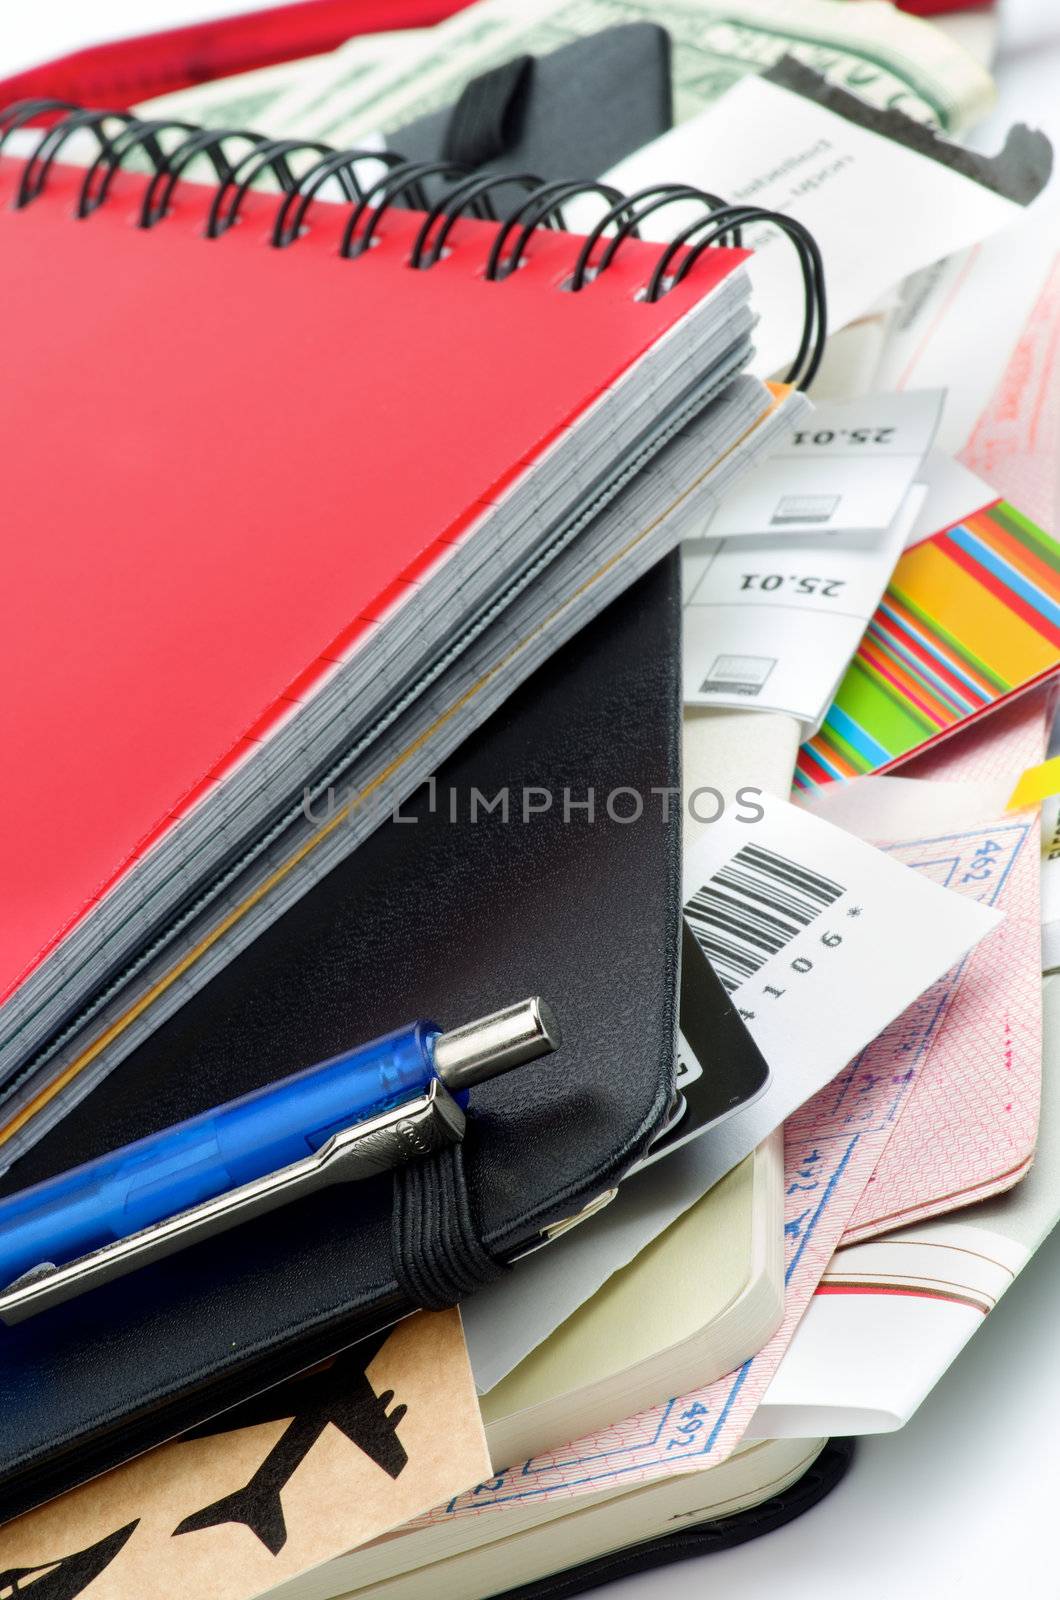 Arrangement of Travel Concept Objects with Planning, Tickets, Currency, Pen and Other Accessories closeup